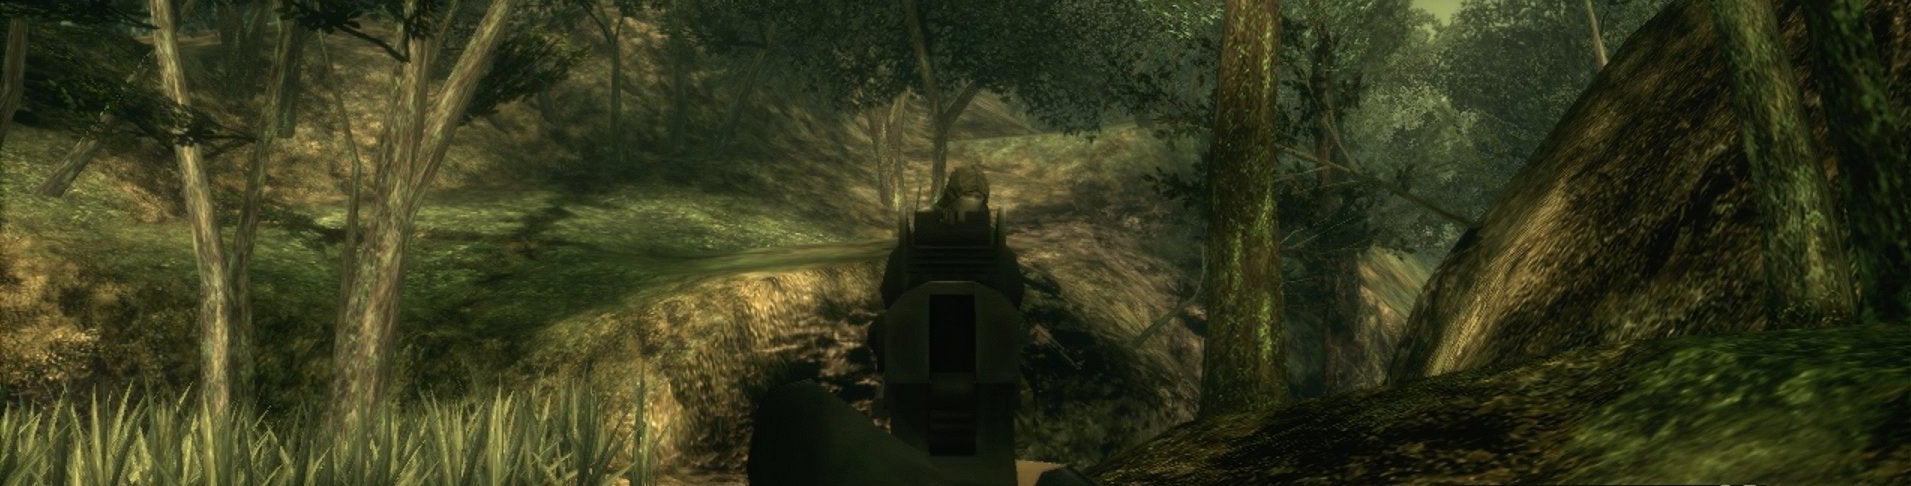 Image for Watch: At least Metal Gear Solid 3 is still really good